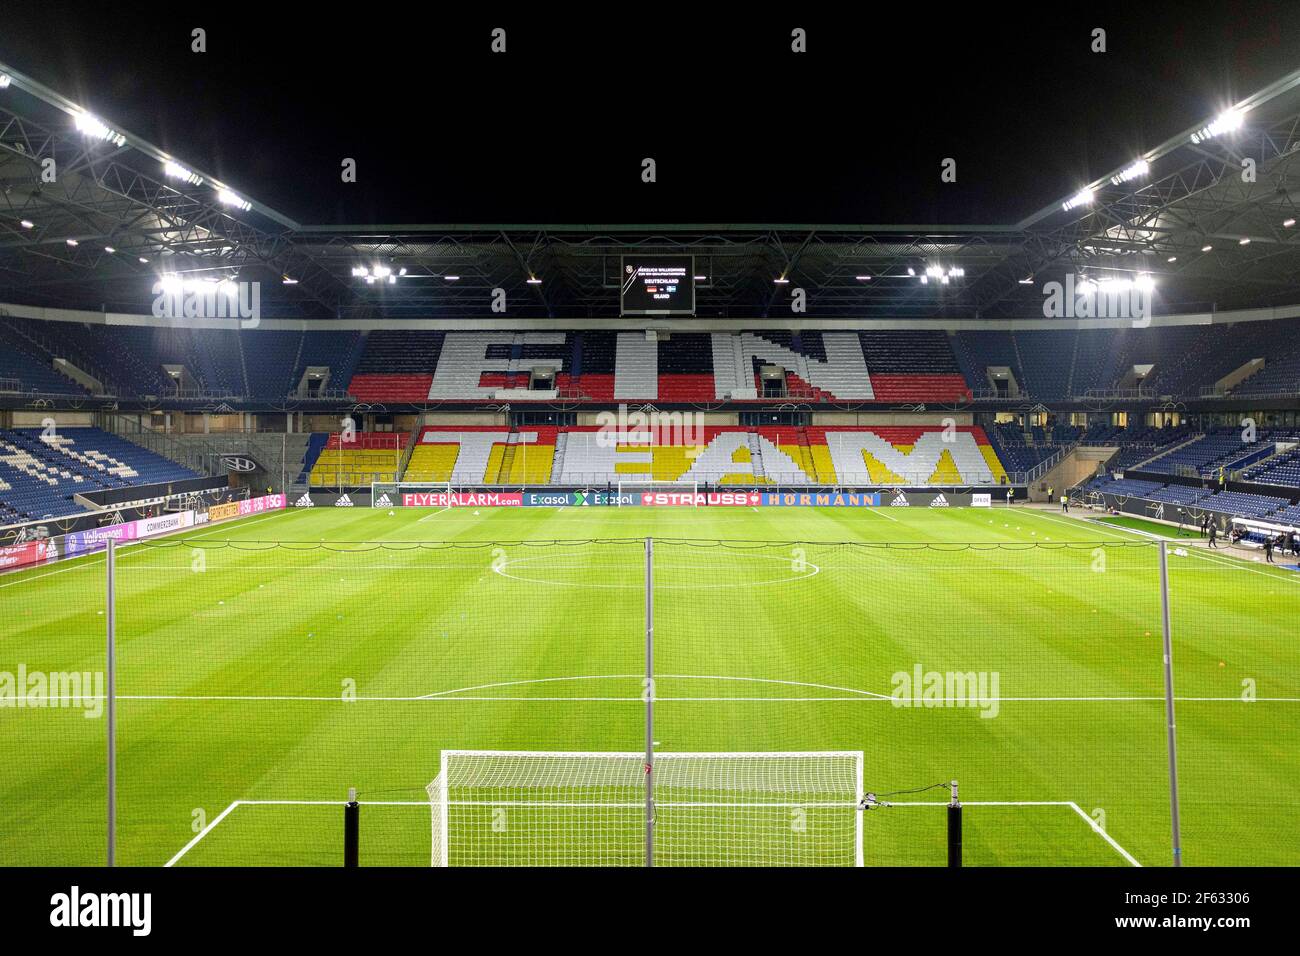 Schauinsland-Reisen-Arena, overview, on the tribune is a choreography in Germany colors and the lettering 'Aû Ein Team' Aû. Soccer Laenderspiel, WM Qualification Group J matchday 1, Germany (GER) - Iceland (ISL) 3: 0, on March 25th, 2021 in Duisburg/Germany. ¬ | usage worldwide Stock Photo